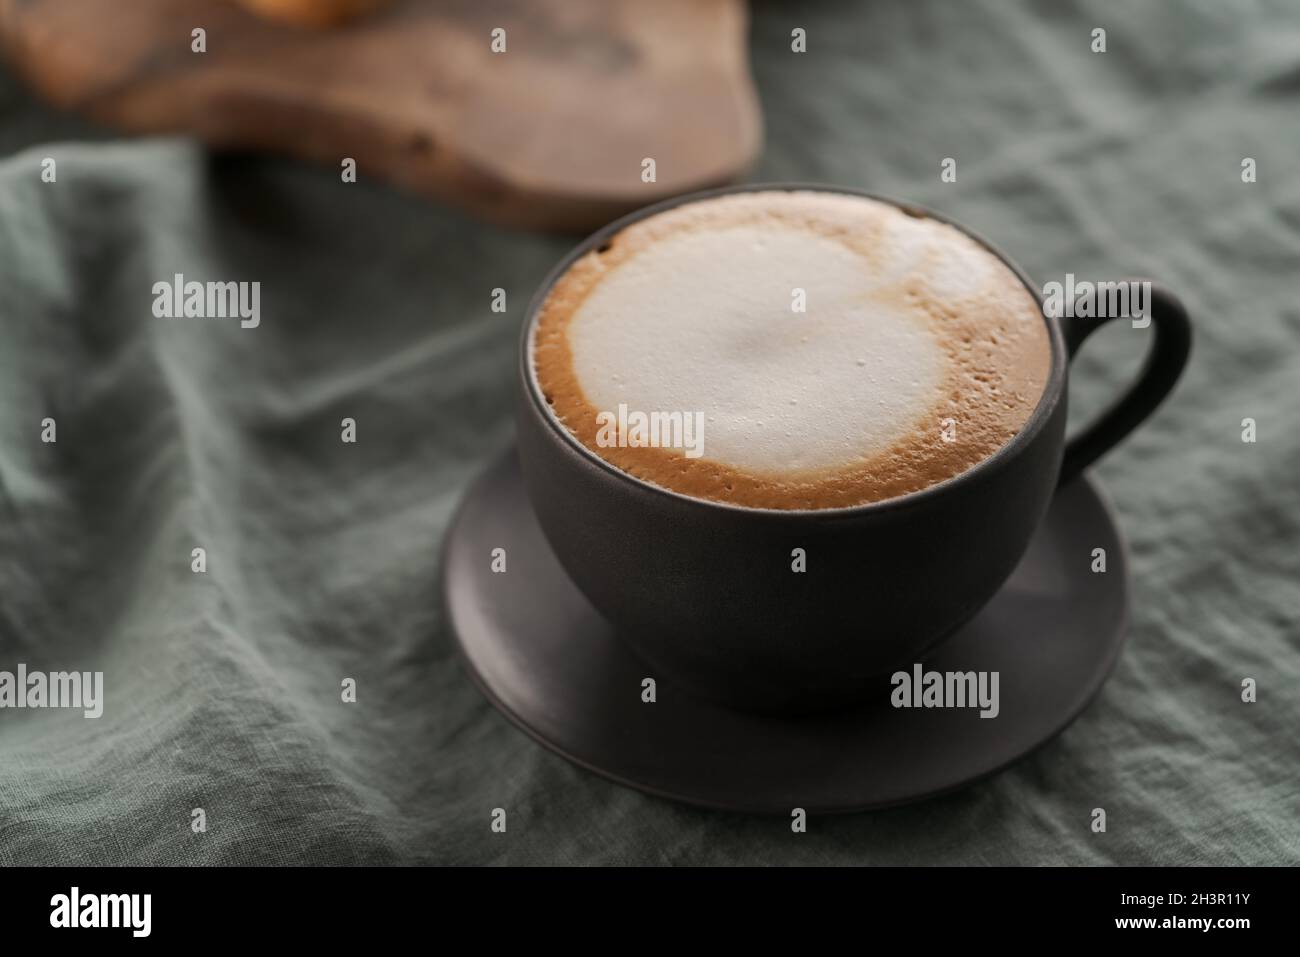 Cappuccino in black cup with ciabatta slices with chocolate spread on background, shallow focus Stock Photo